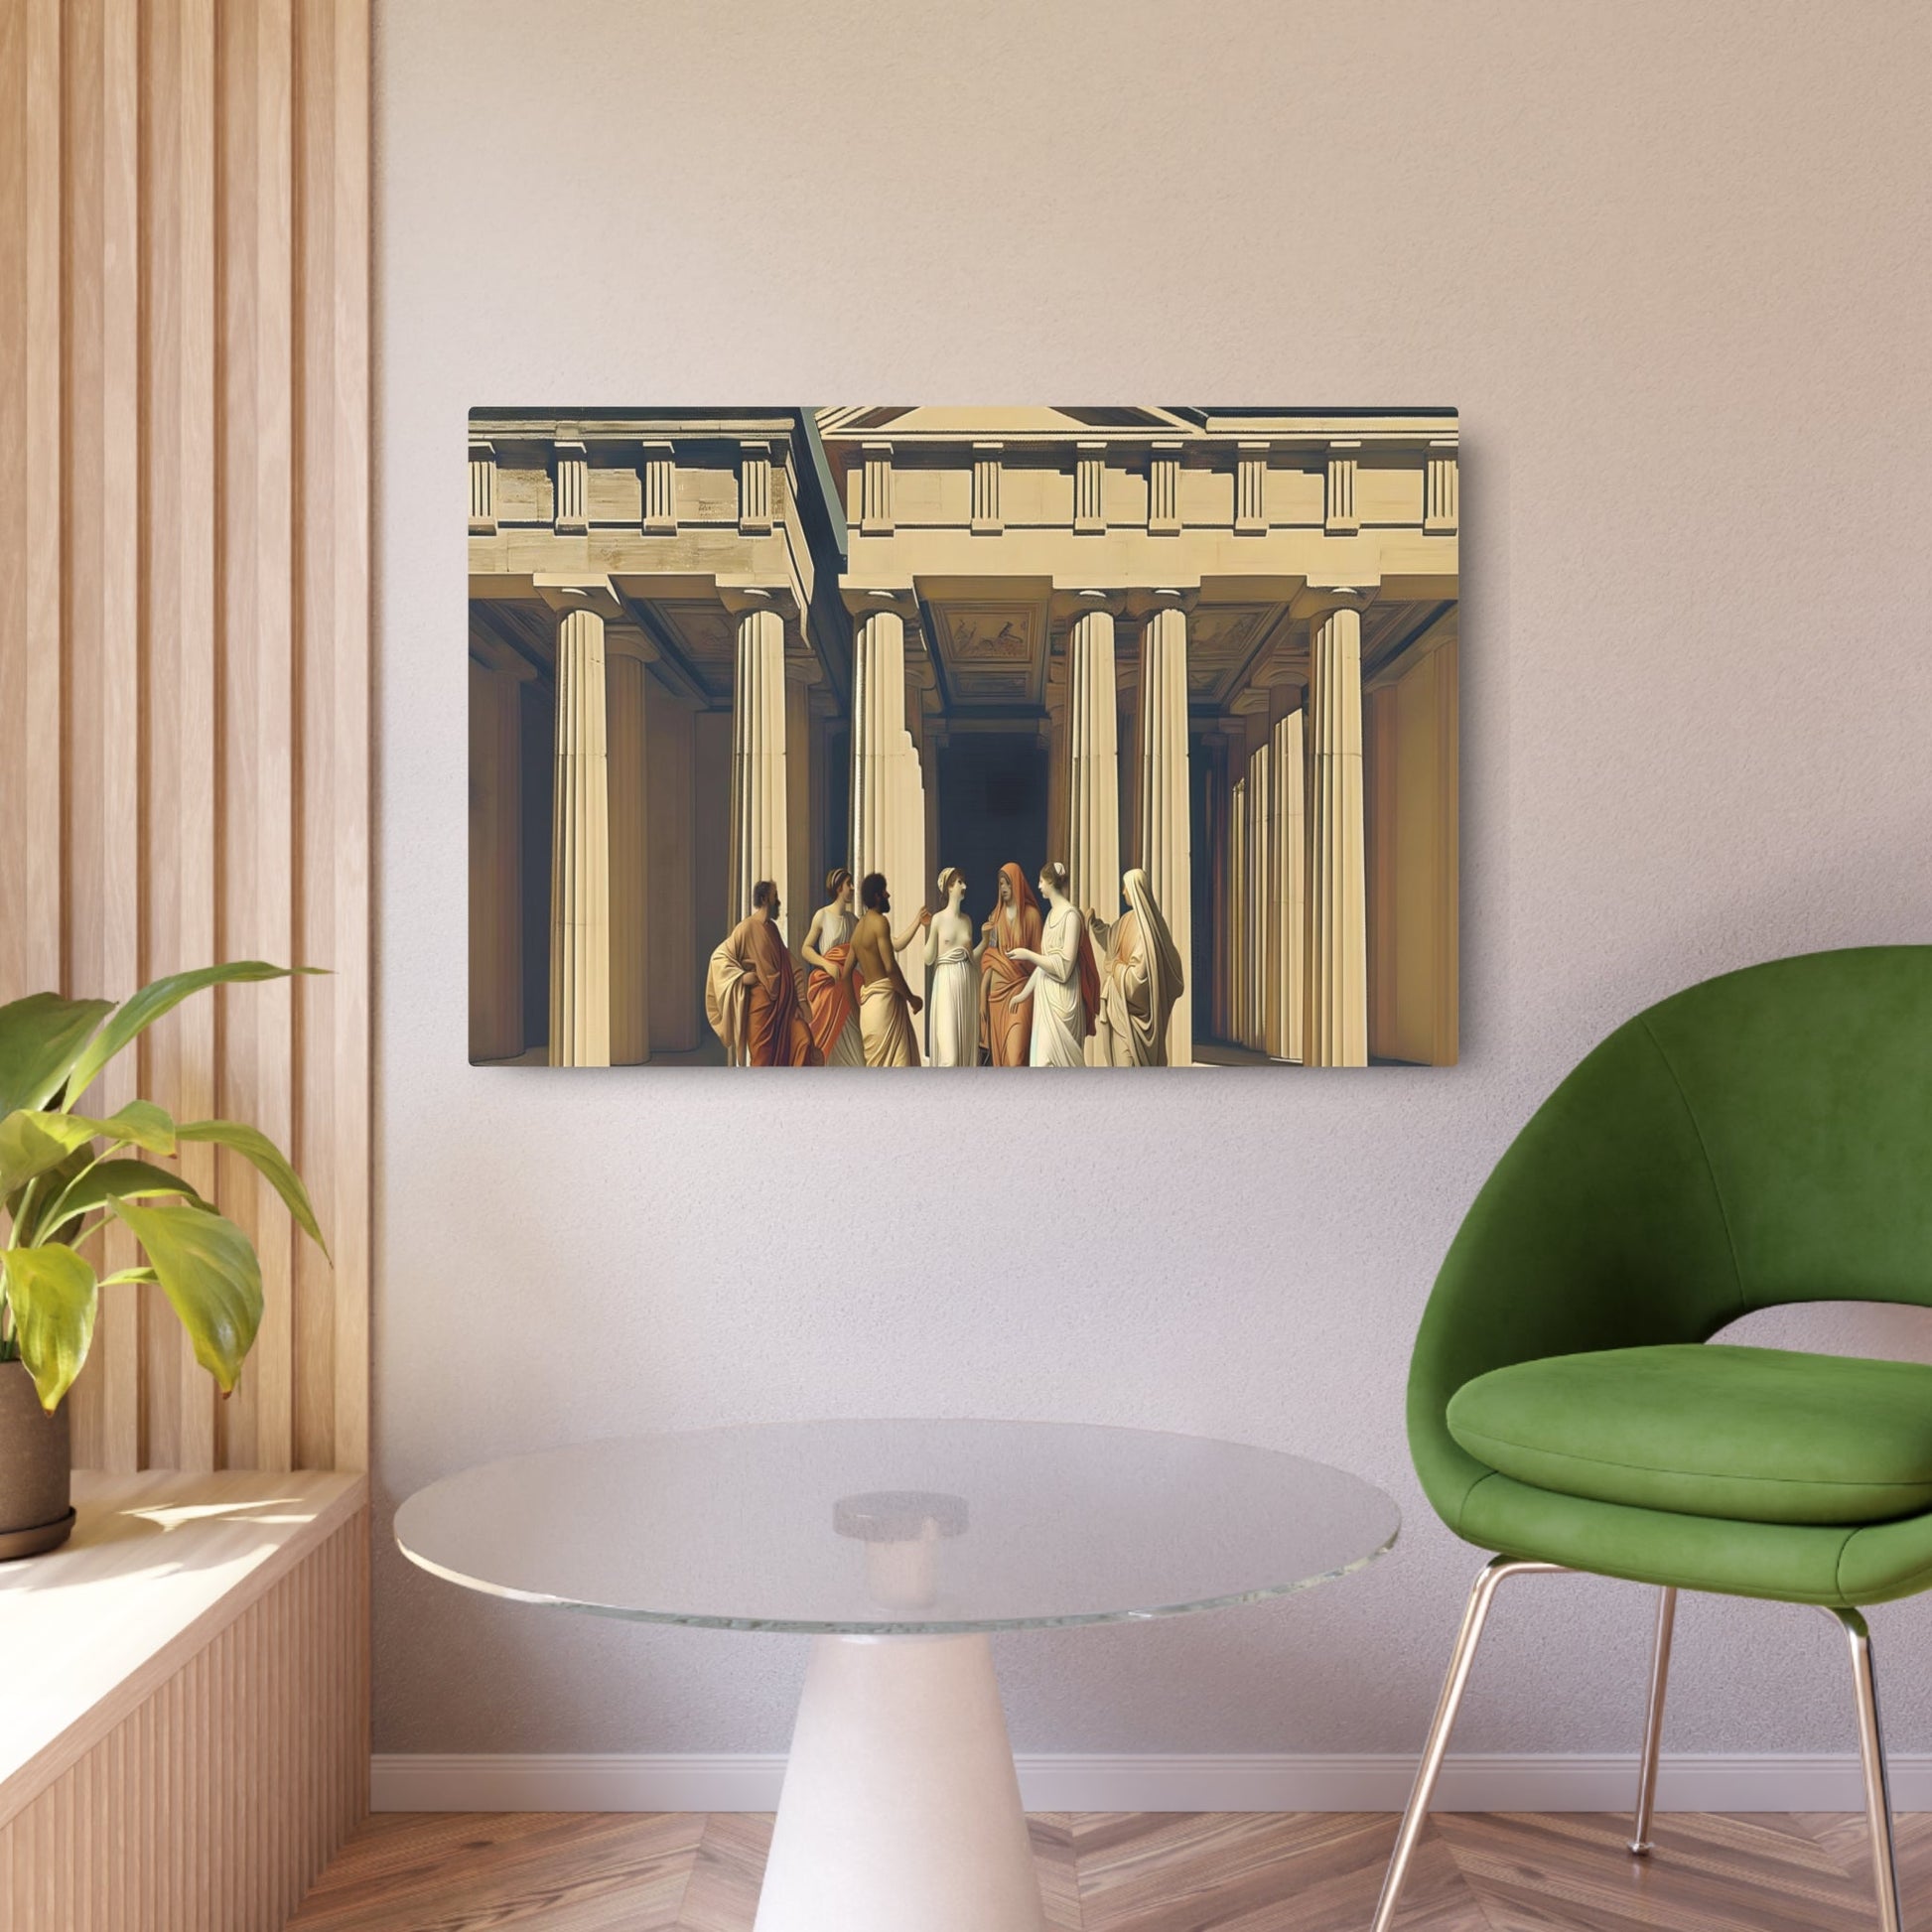 Metal Poster Art | "Neoclassical Artwork with Greco-Roman Architecture & Robed Figures in Earthy Tones - Western Art Styles Collection" - Metal Poster Art 36″ x 24″ (Horizontal) 0.12''